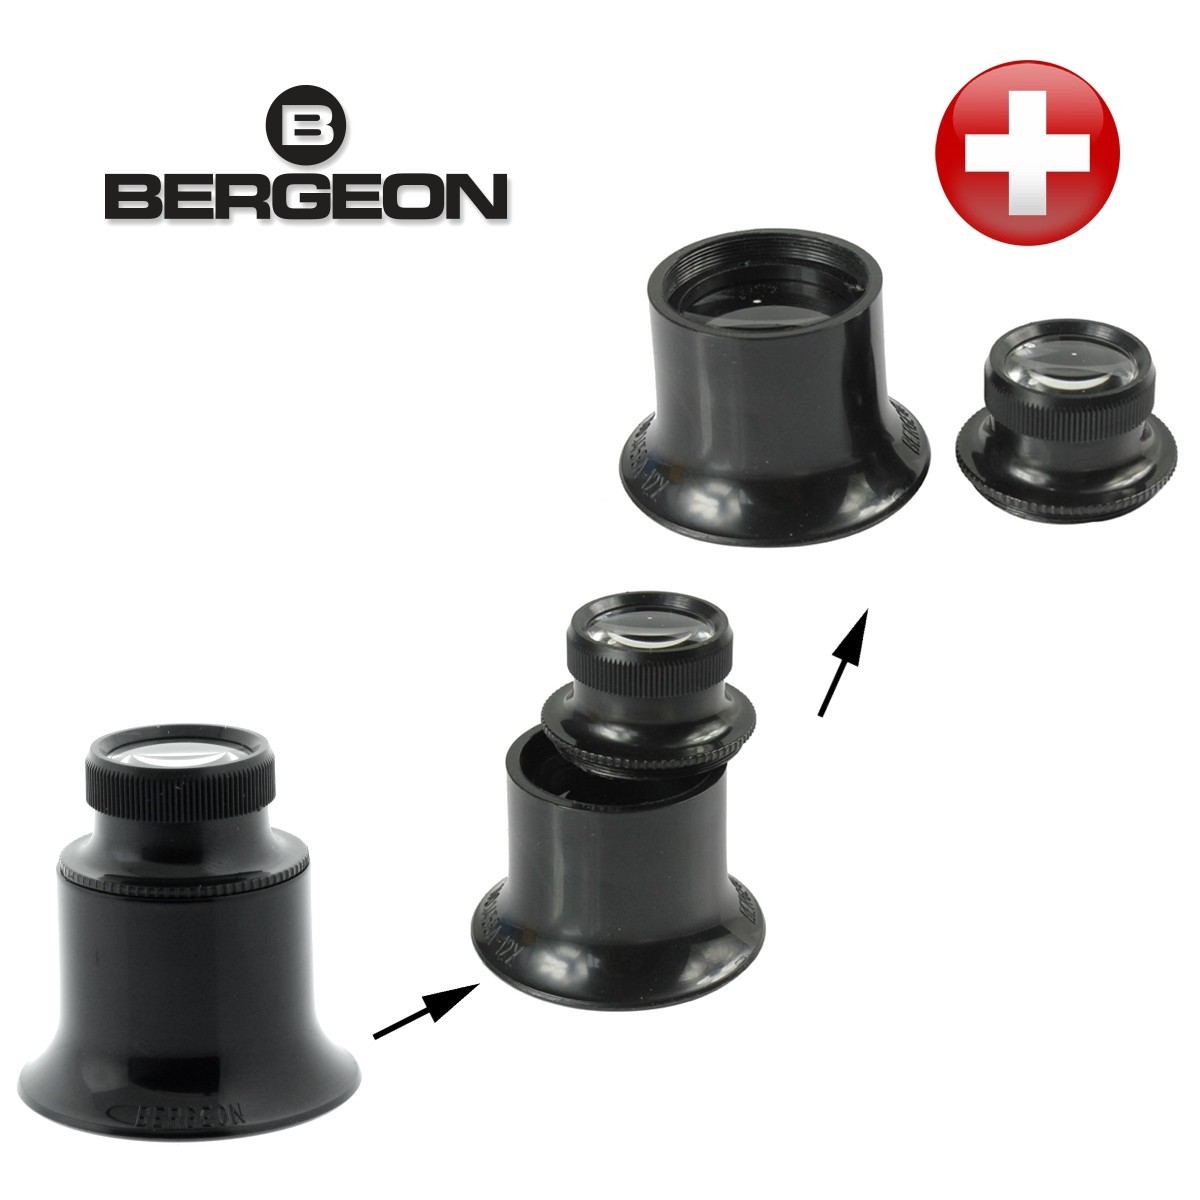 Bergeon 1458-A-15 Watchmaker Double Lens Eyeglass Loupe 15x Magnification 